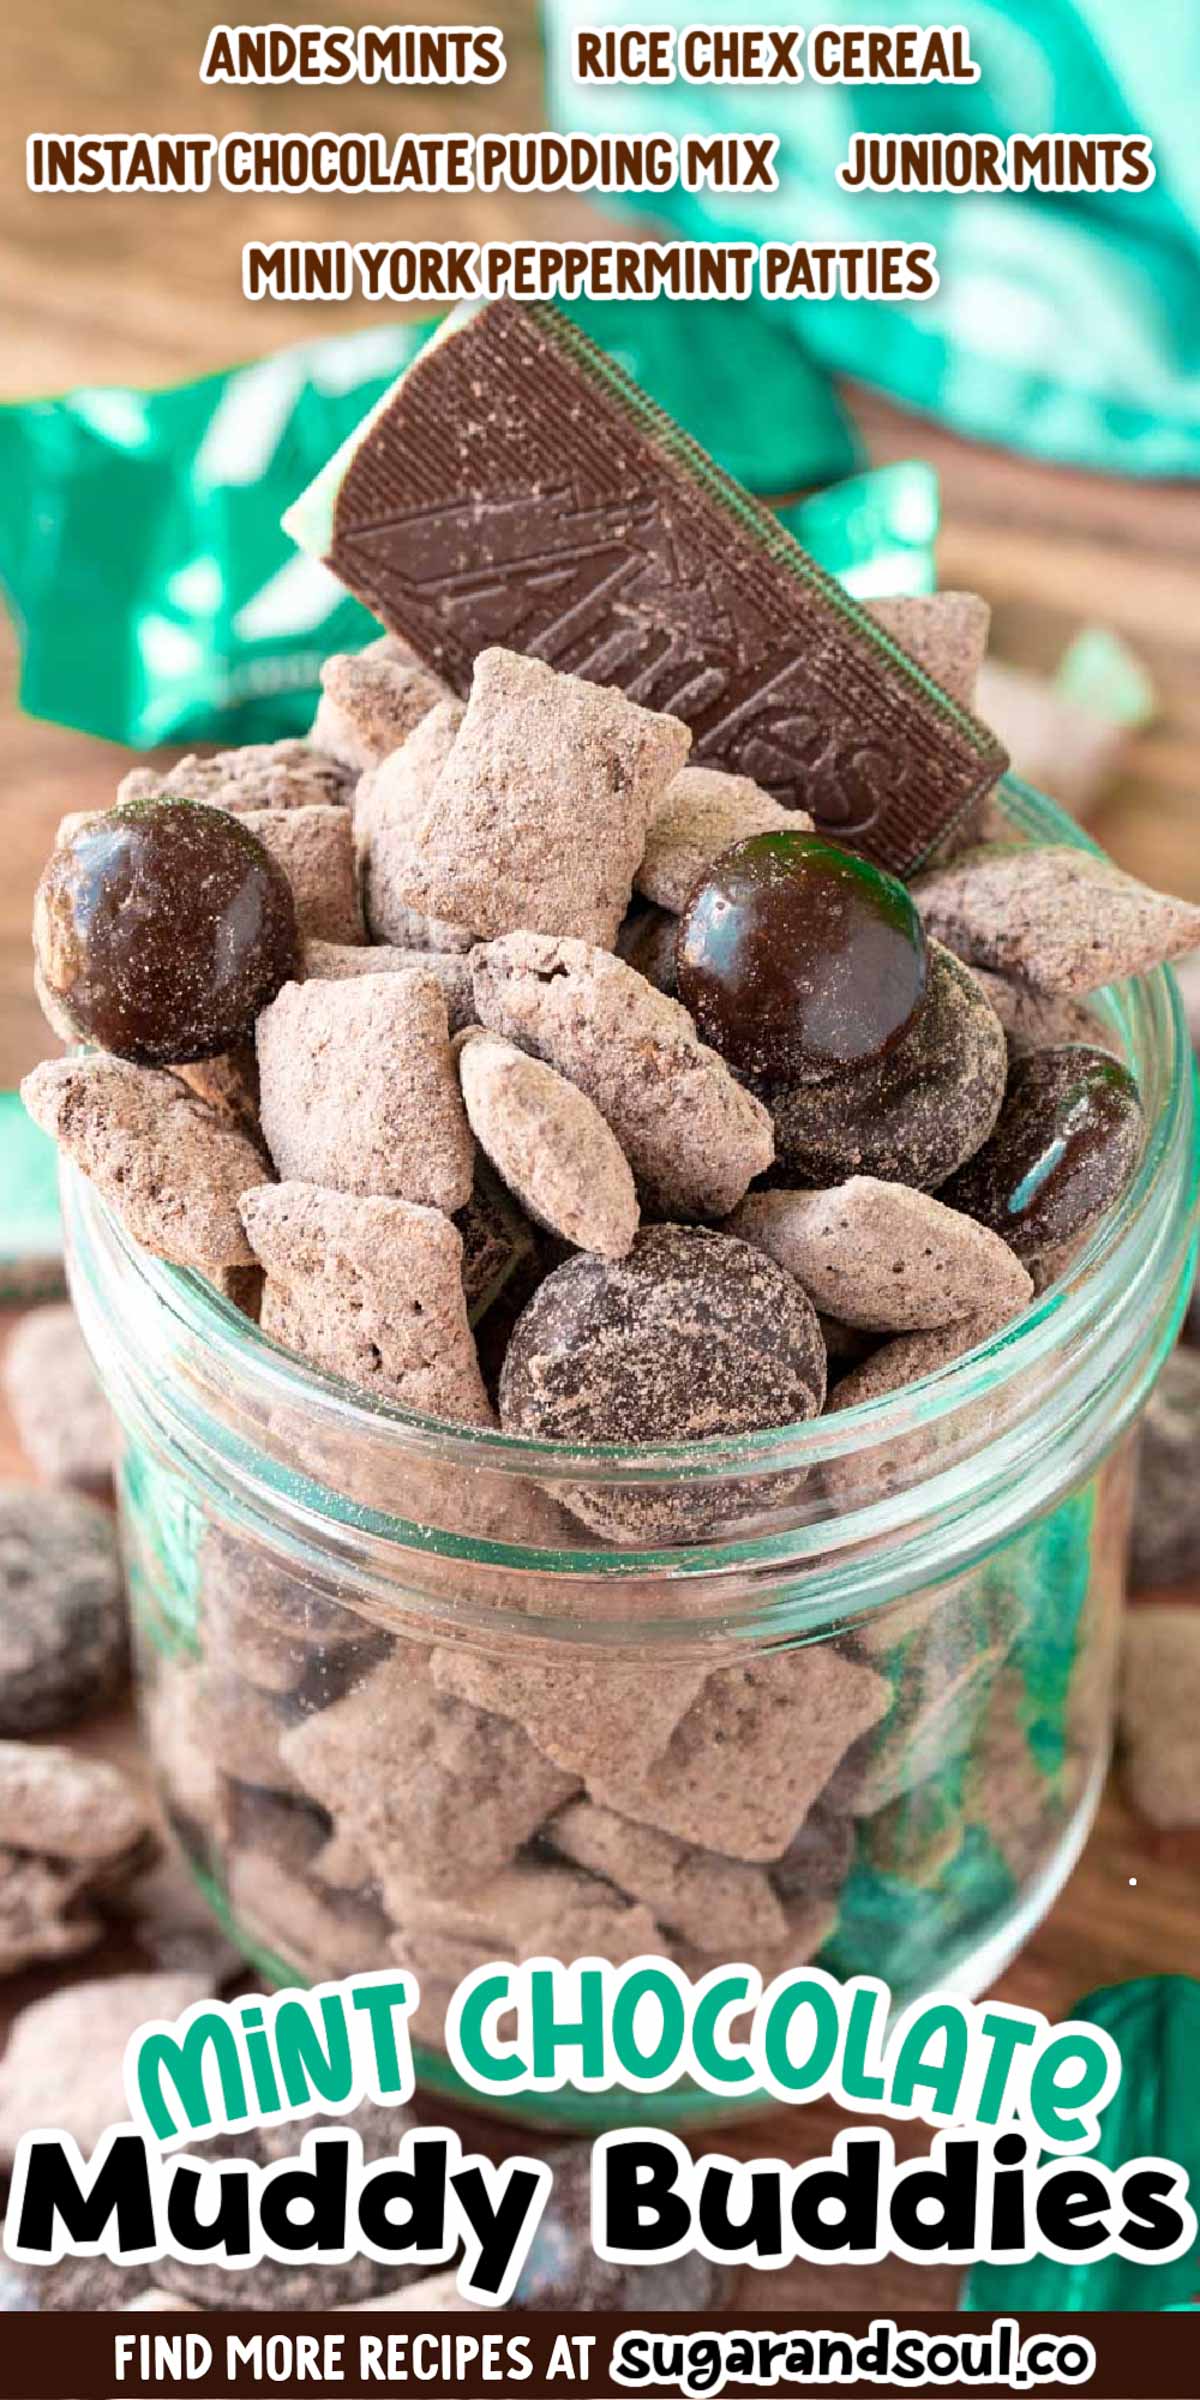 Mint Chocolate Muddy Buddies are a cool minty spin-off from the classic treat everyone loves, made with only 5 ingredients in just 10 minutes! via @sugarandsoulco